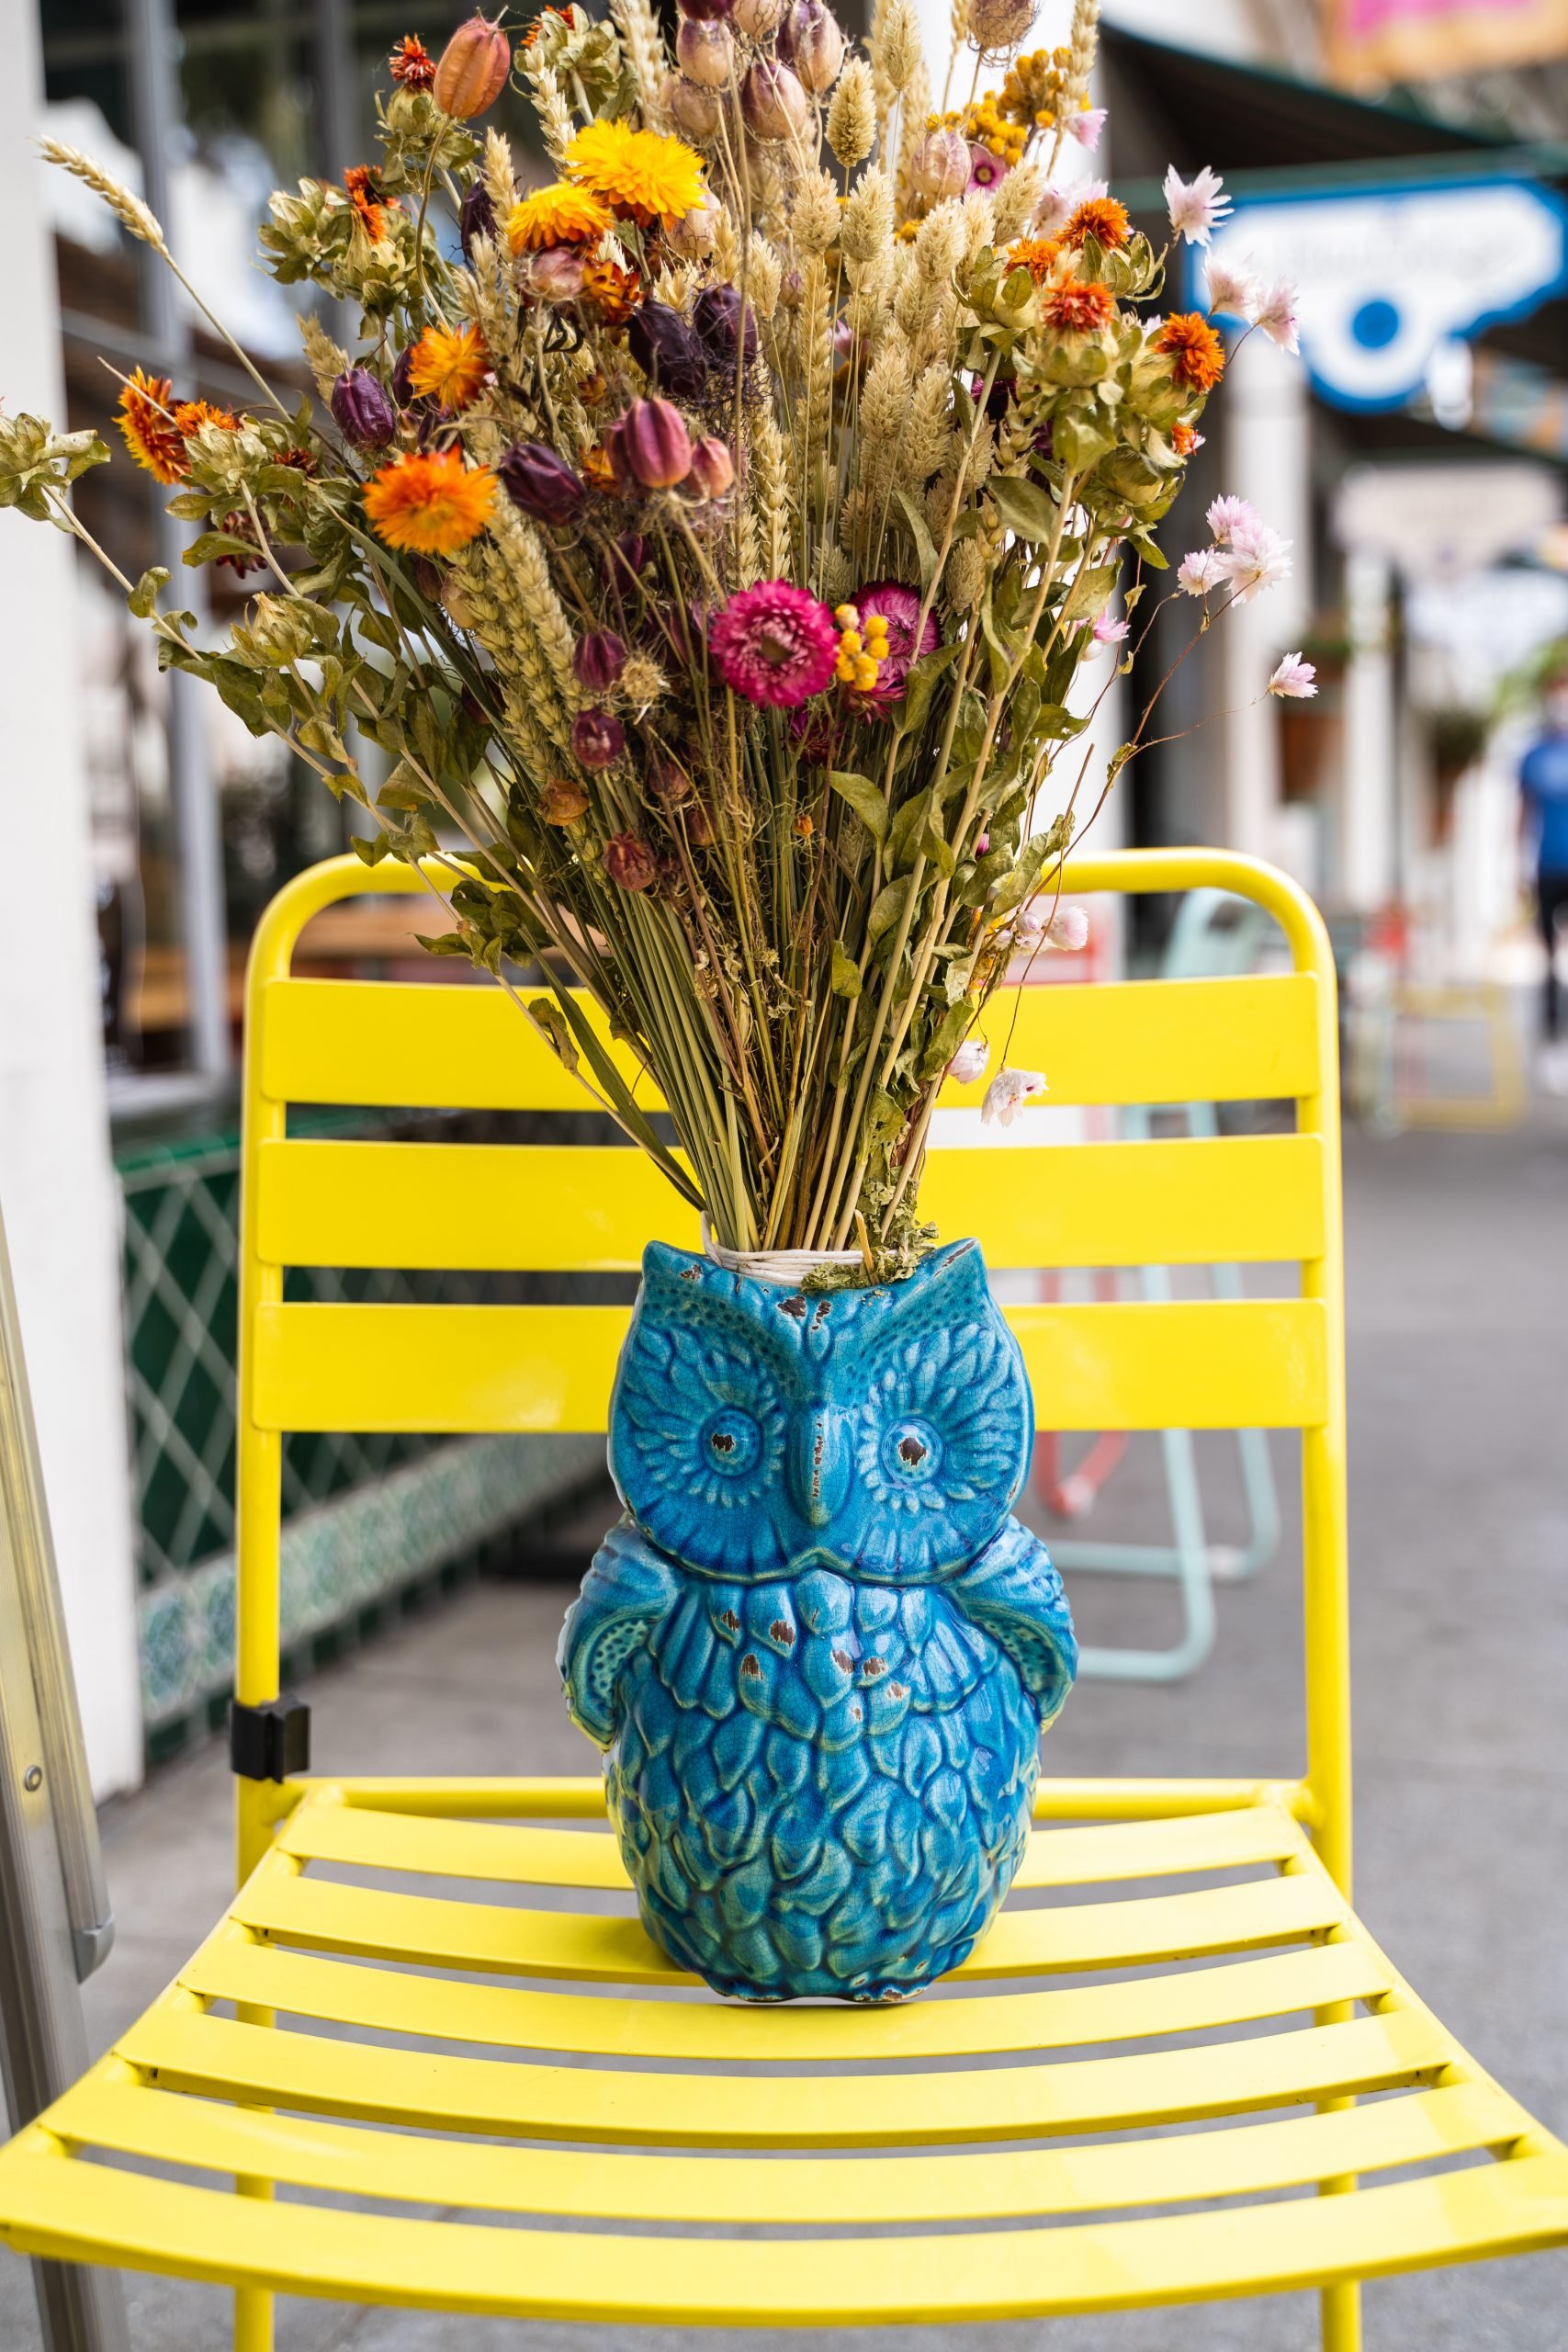 Flower arrangement in a blue owl vase sitting on a yellow chair by other stores in the background